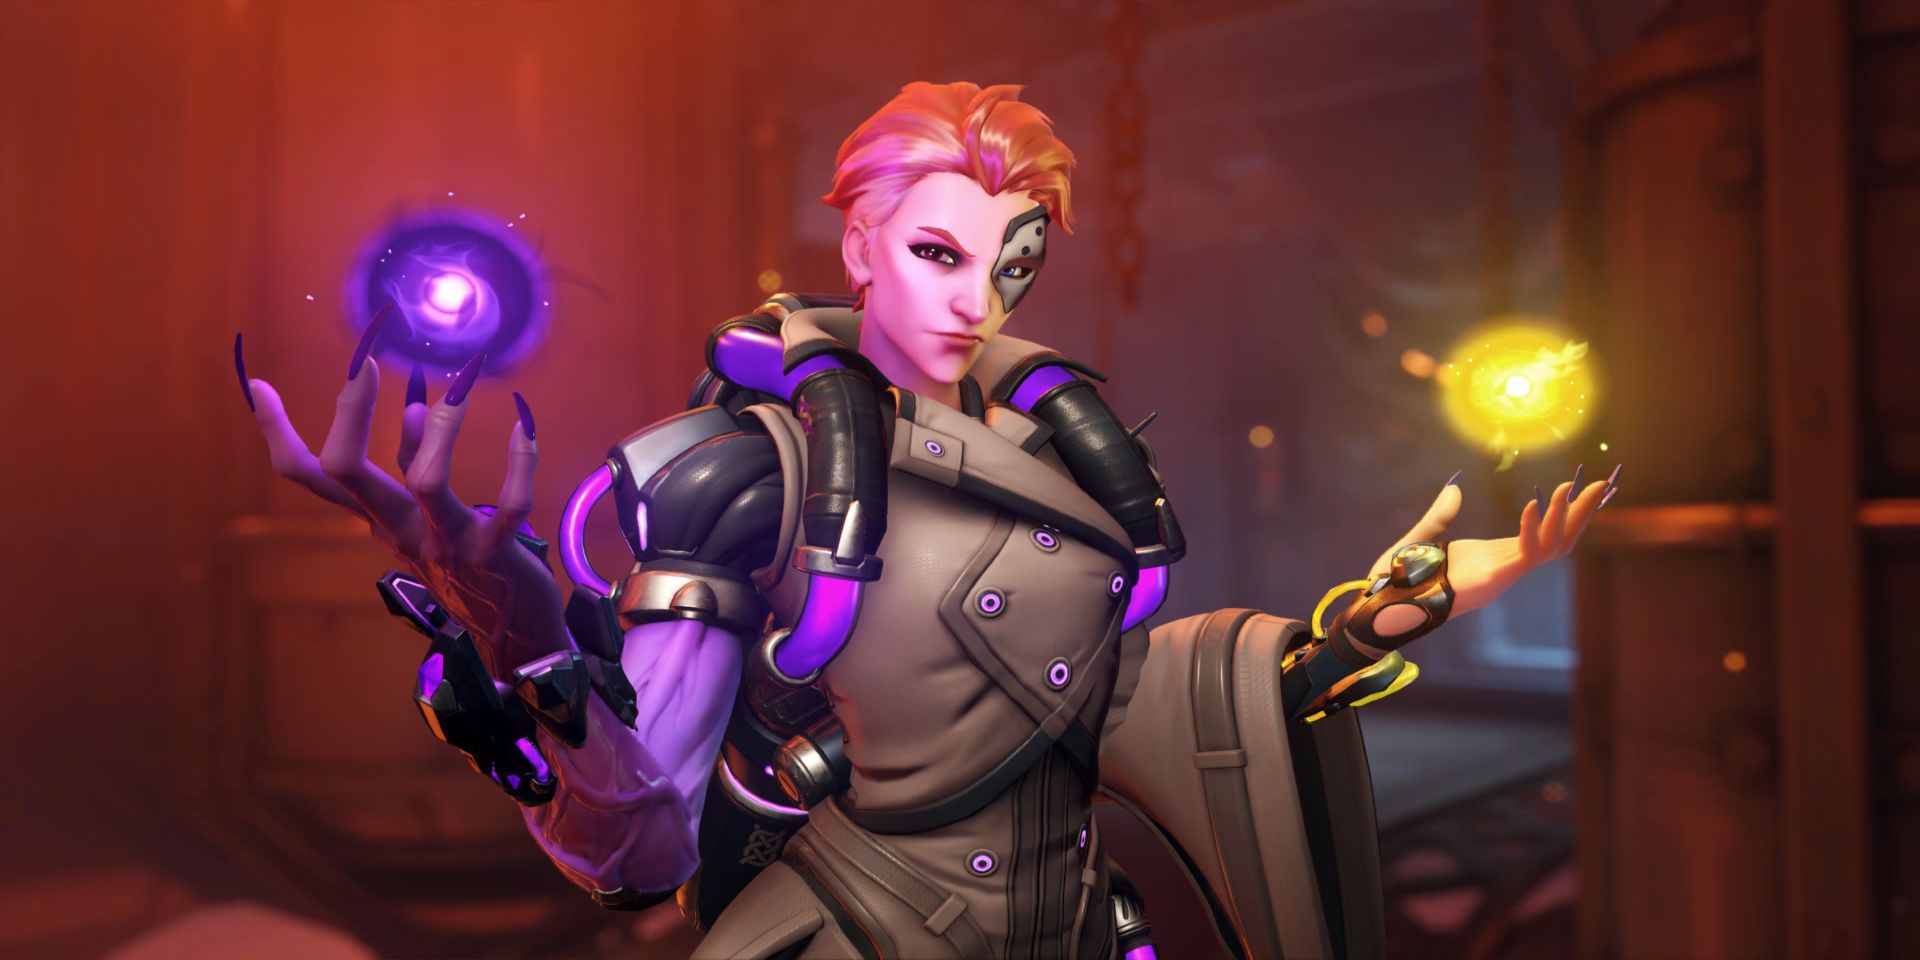 Moira wielding her poison and healing orbs in Overwatch 2